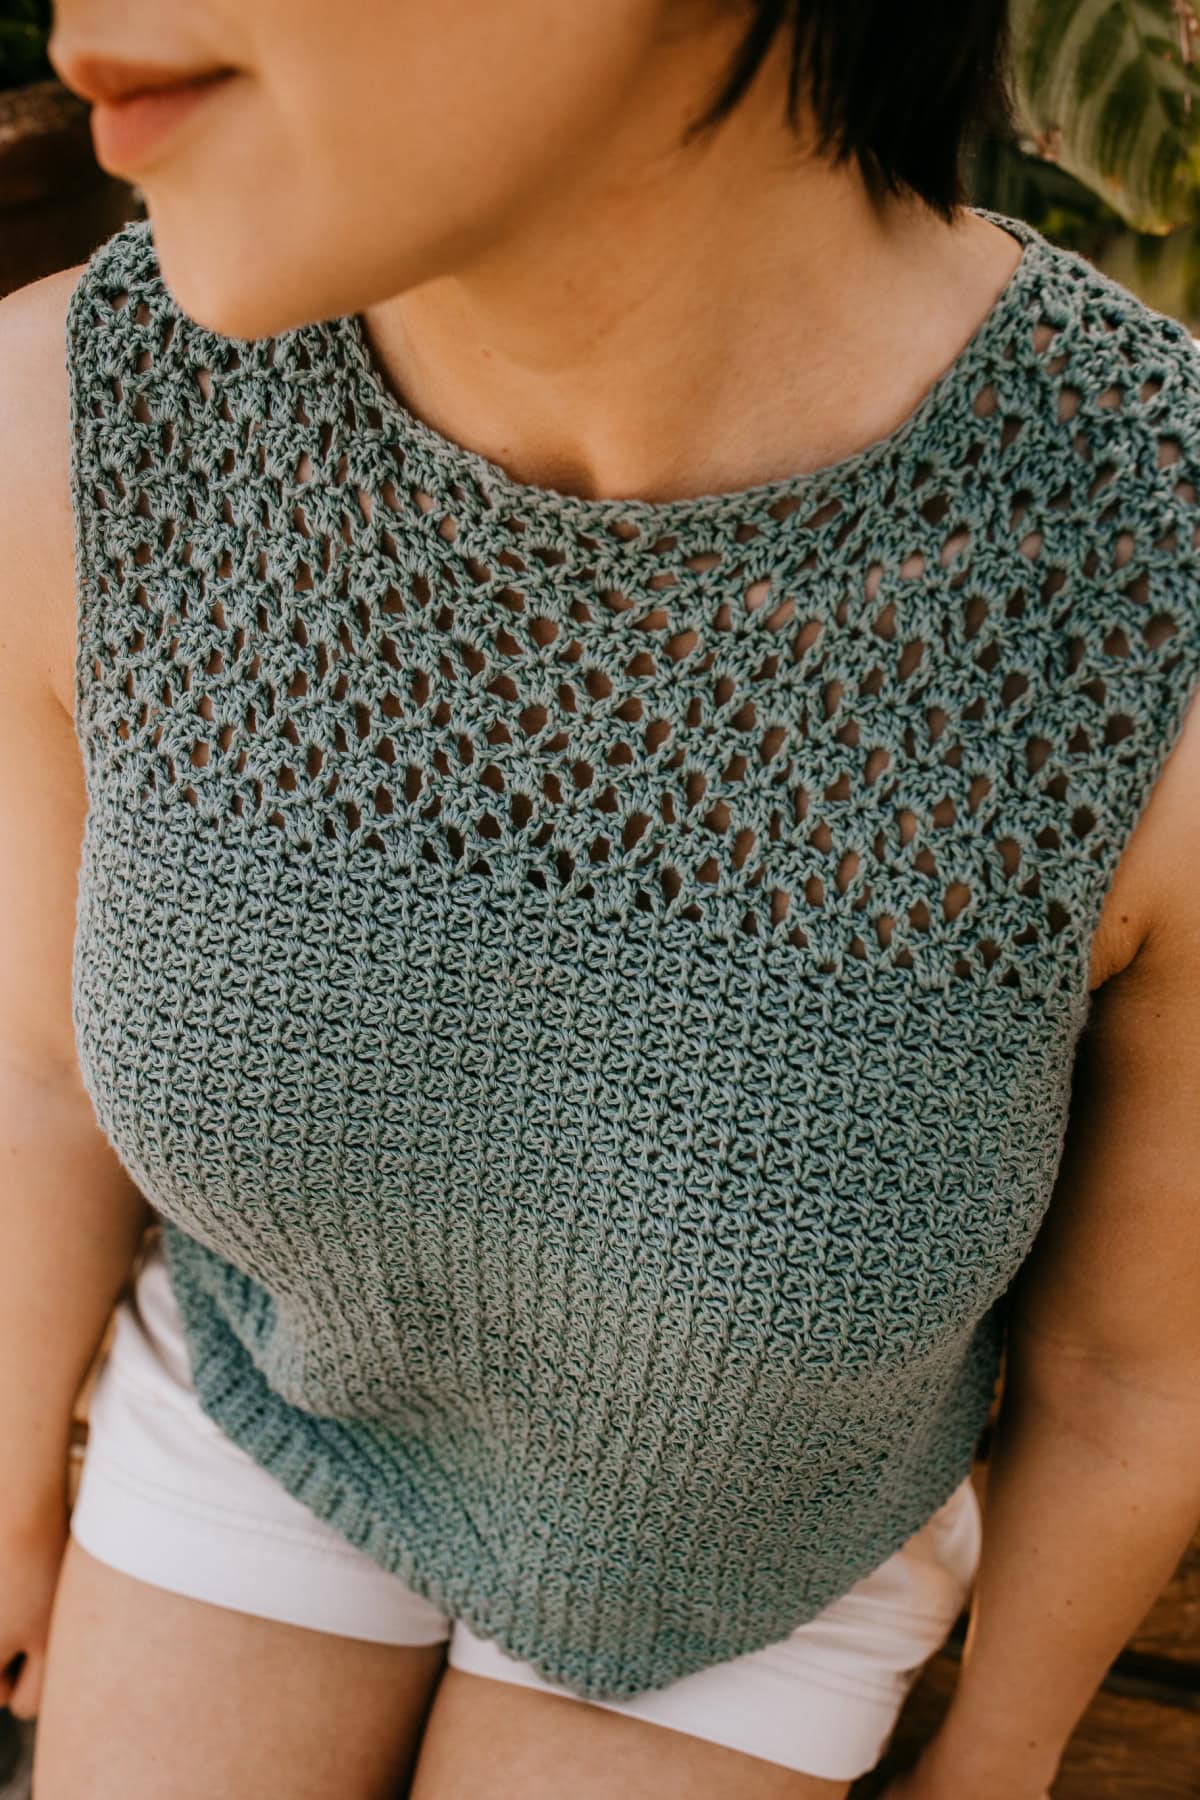 A close-up of the lace on a crochet summer top.